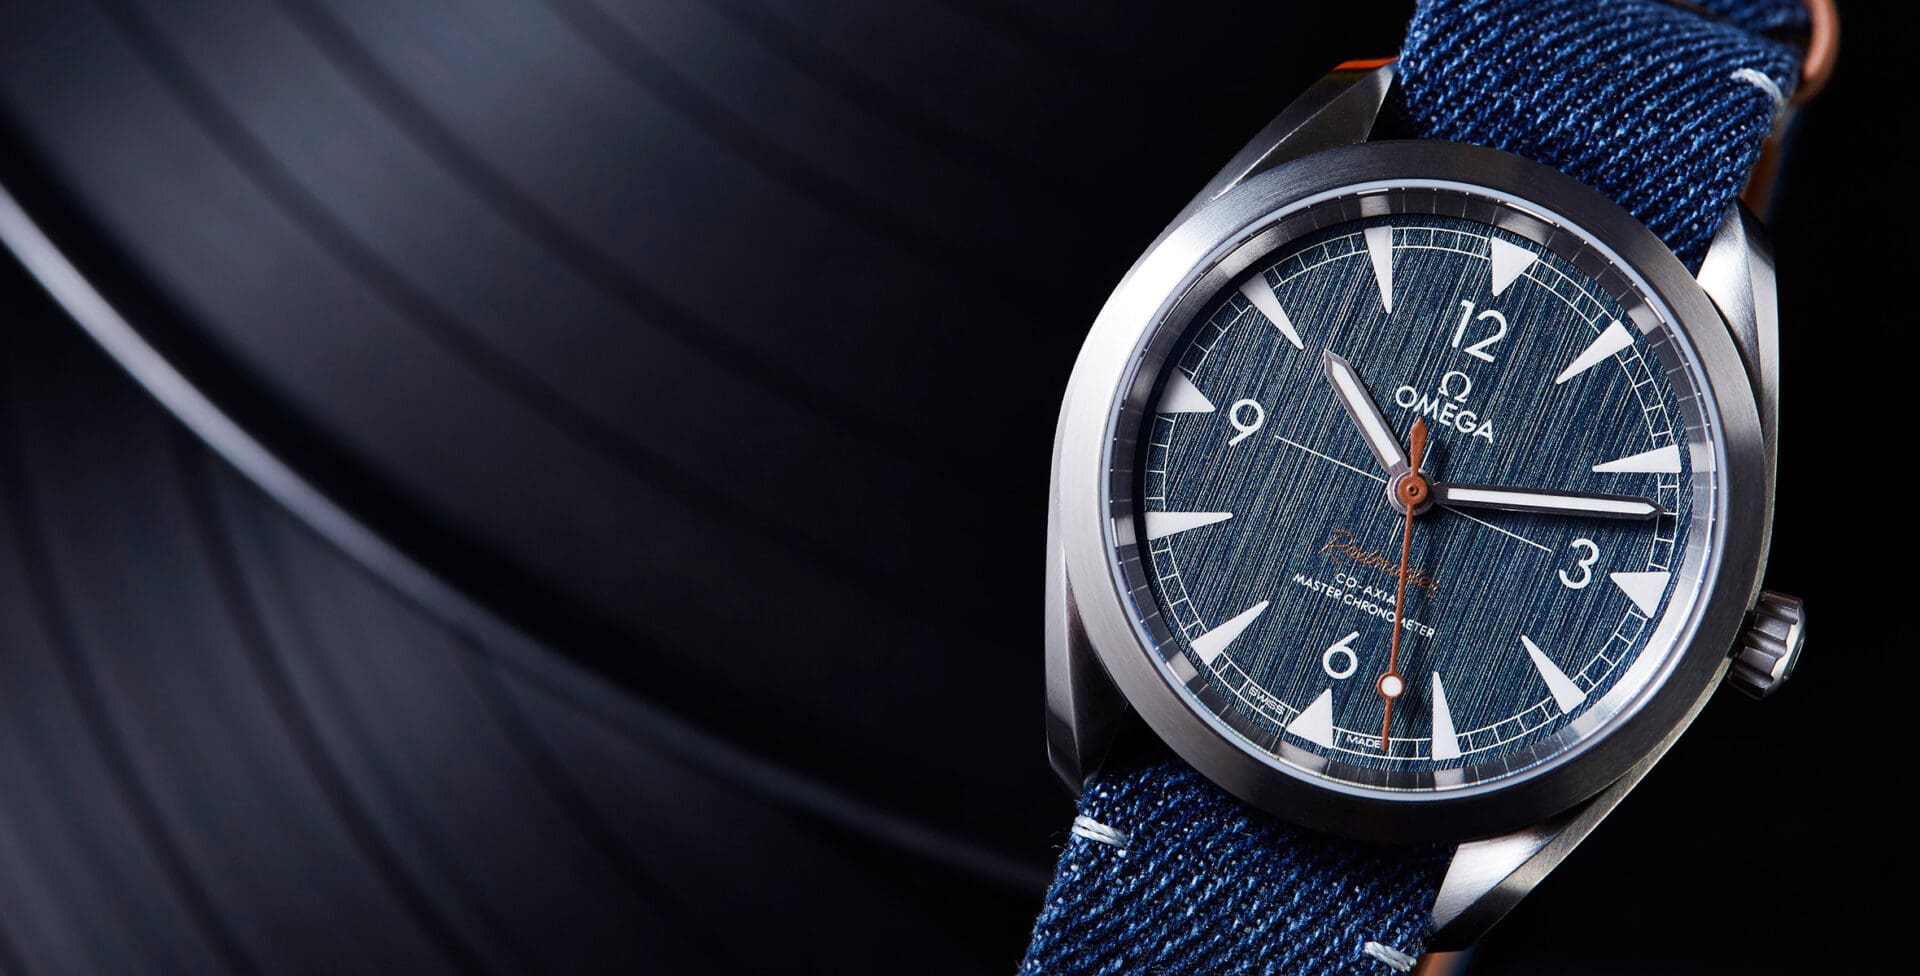 IN-DEPTH: You’ve seen blue dials before, but not like this – the Omega Railmaster in blue denim